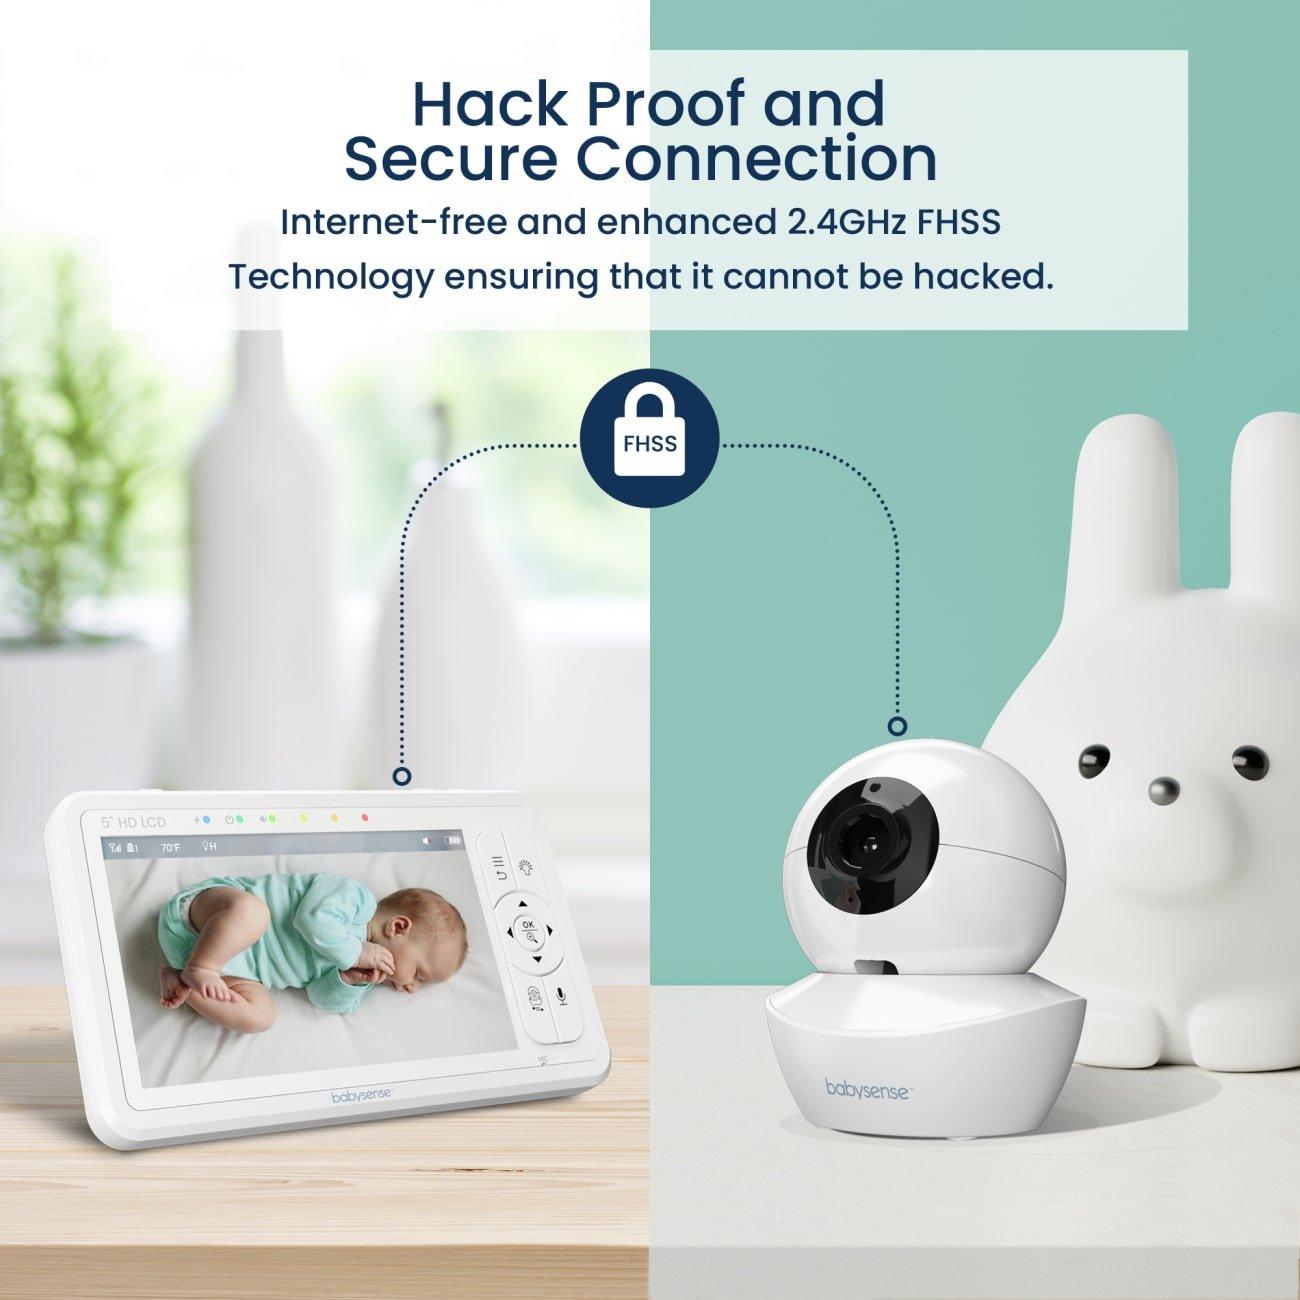 Baby Products Online - Babysense Extra Camera Unit for Video Baby